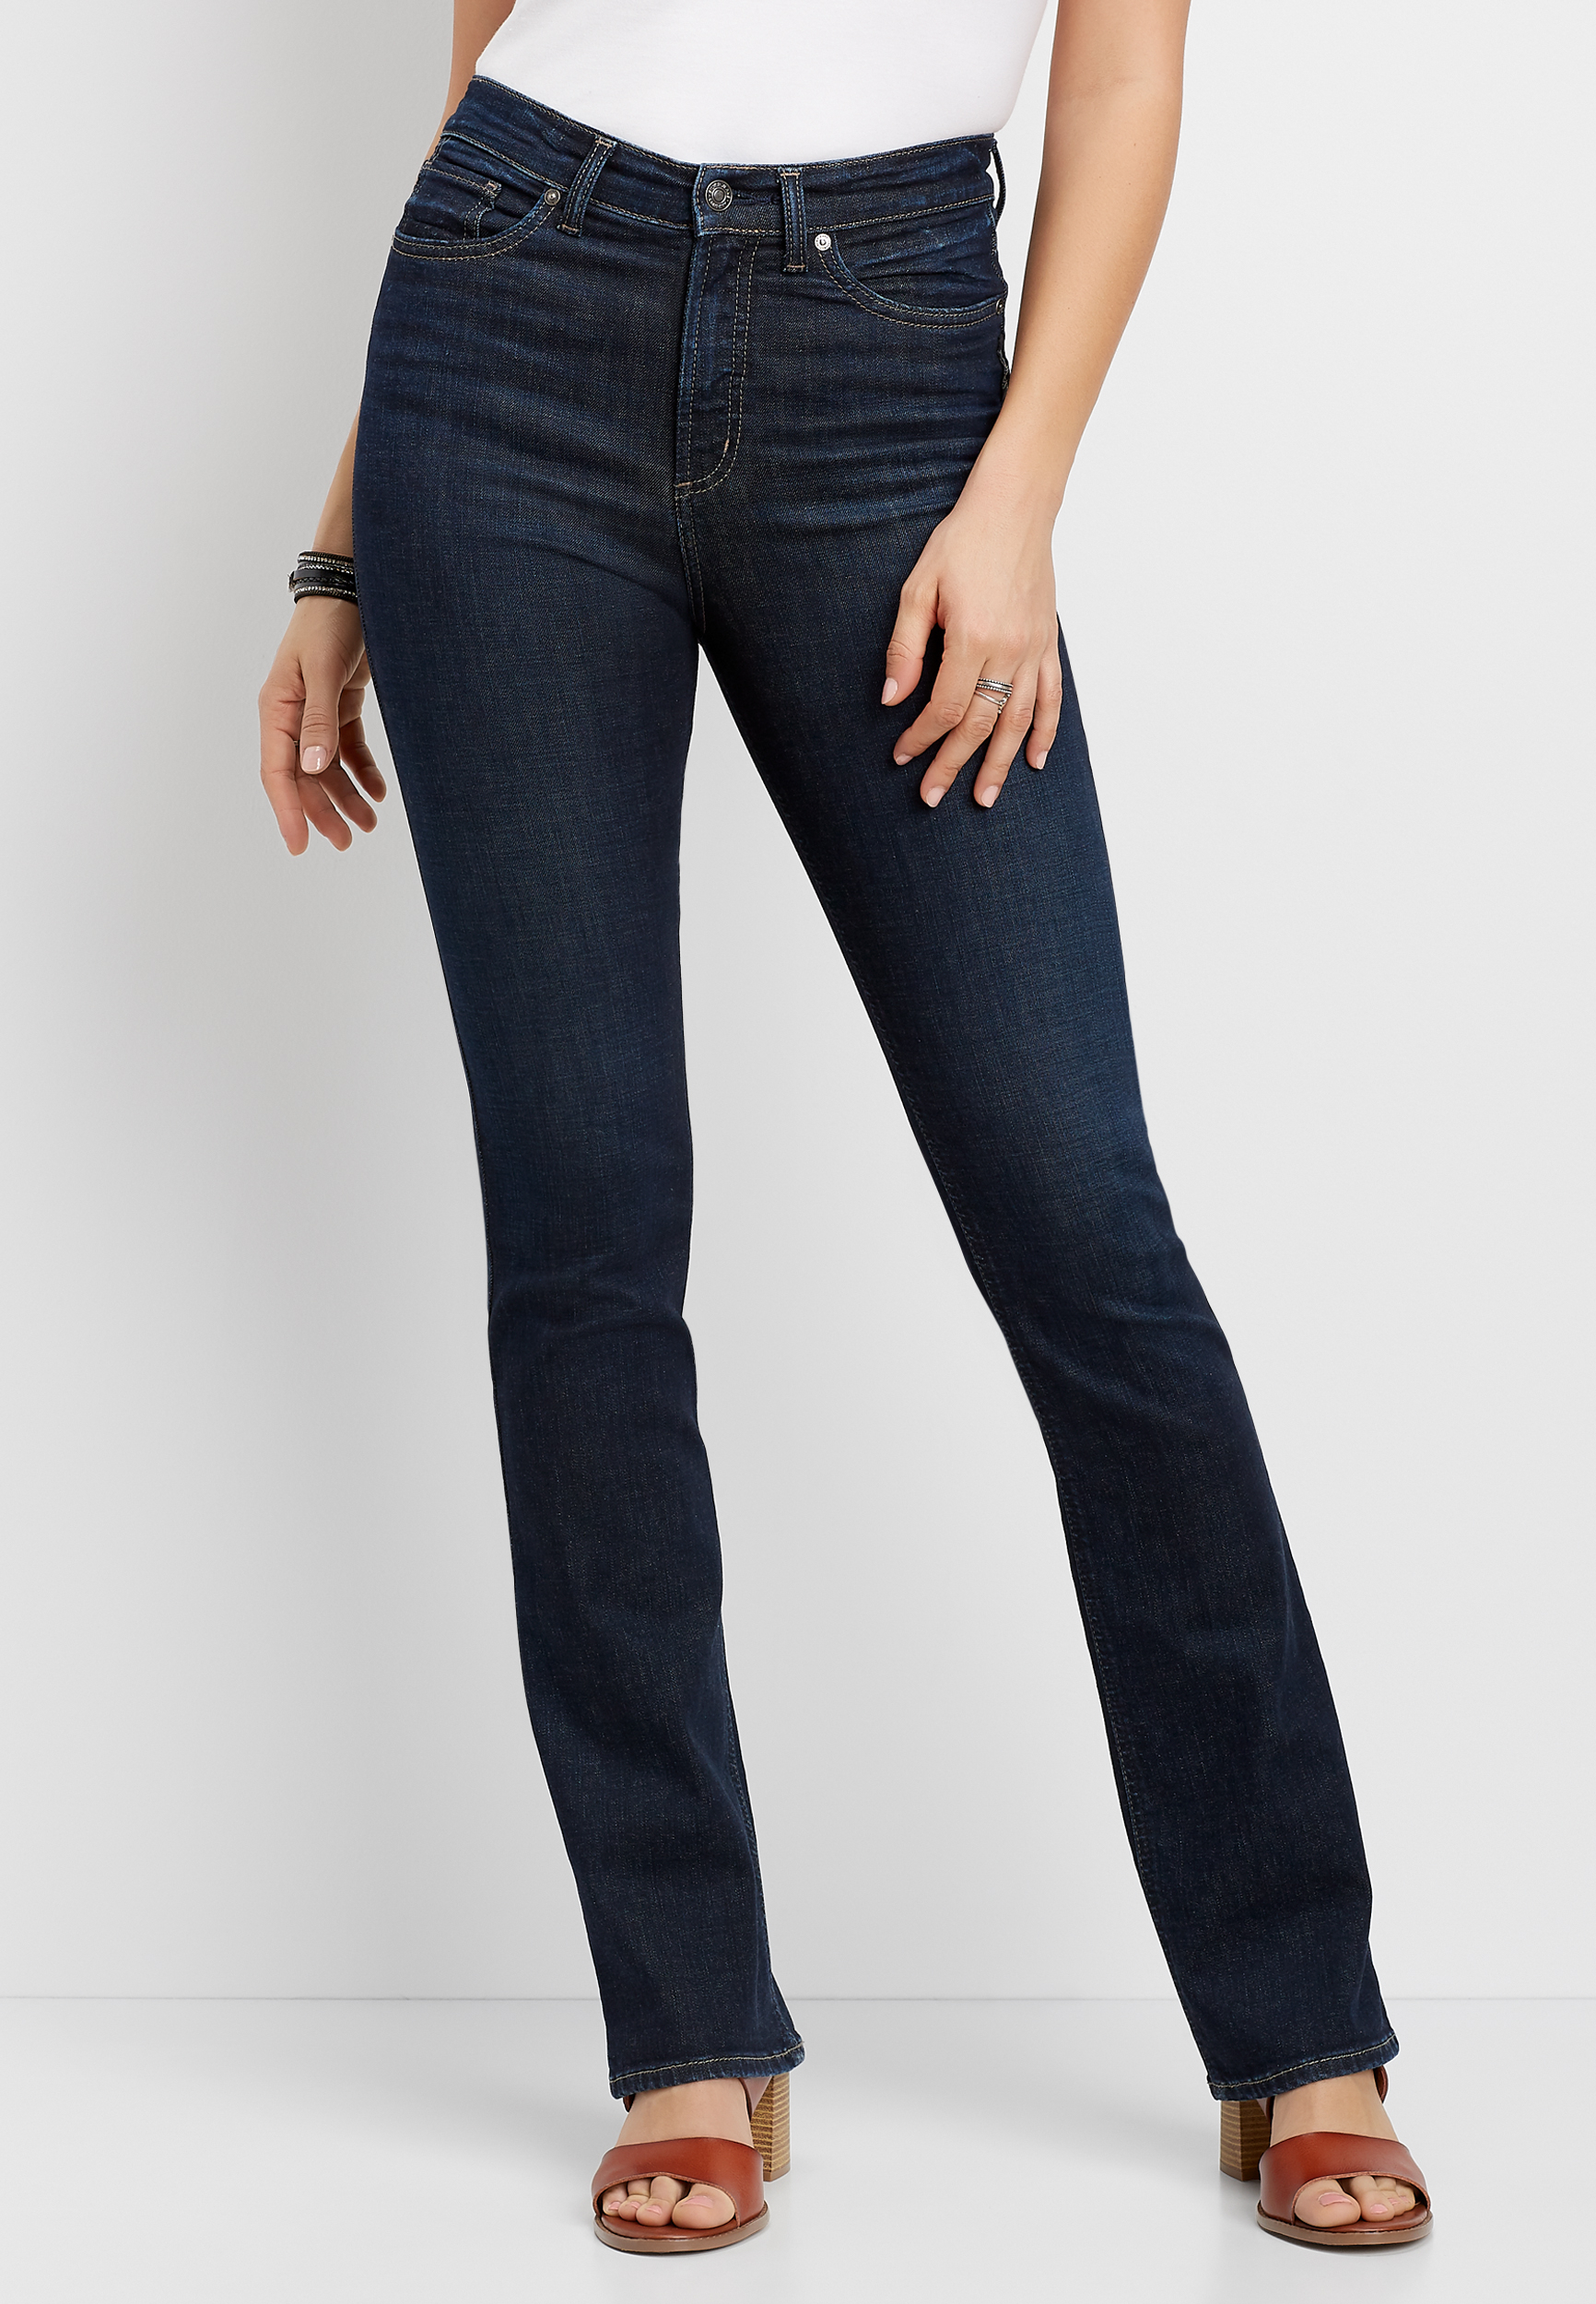 silver high rise jeans